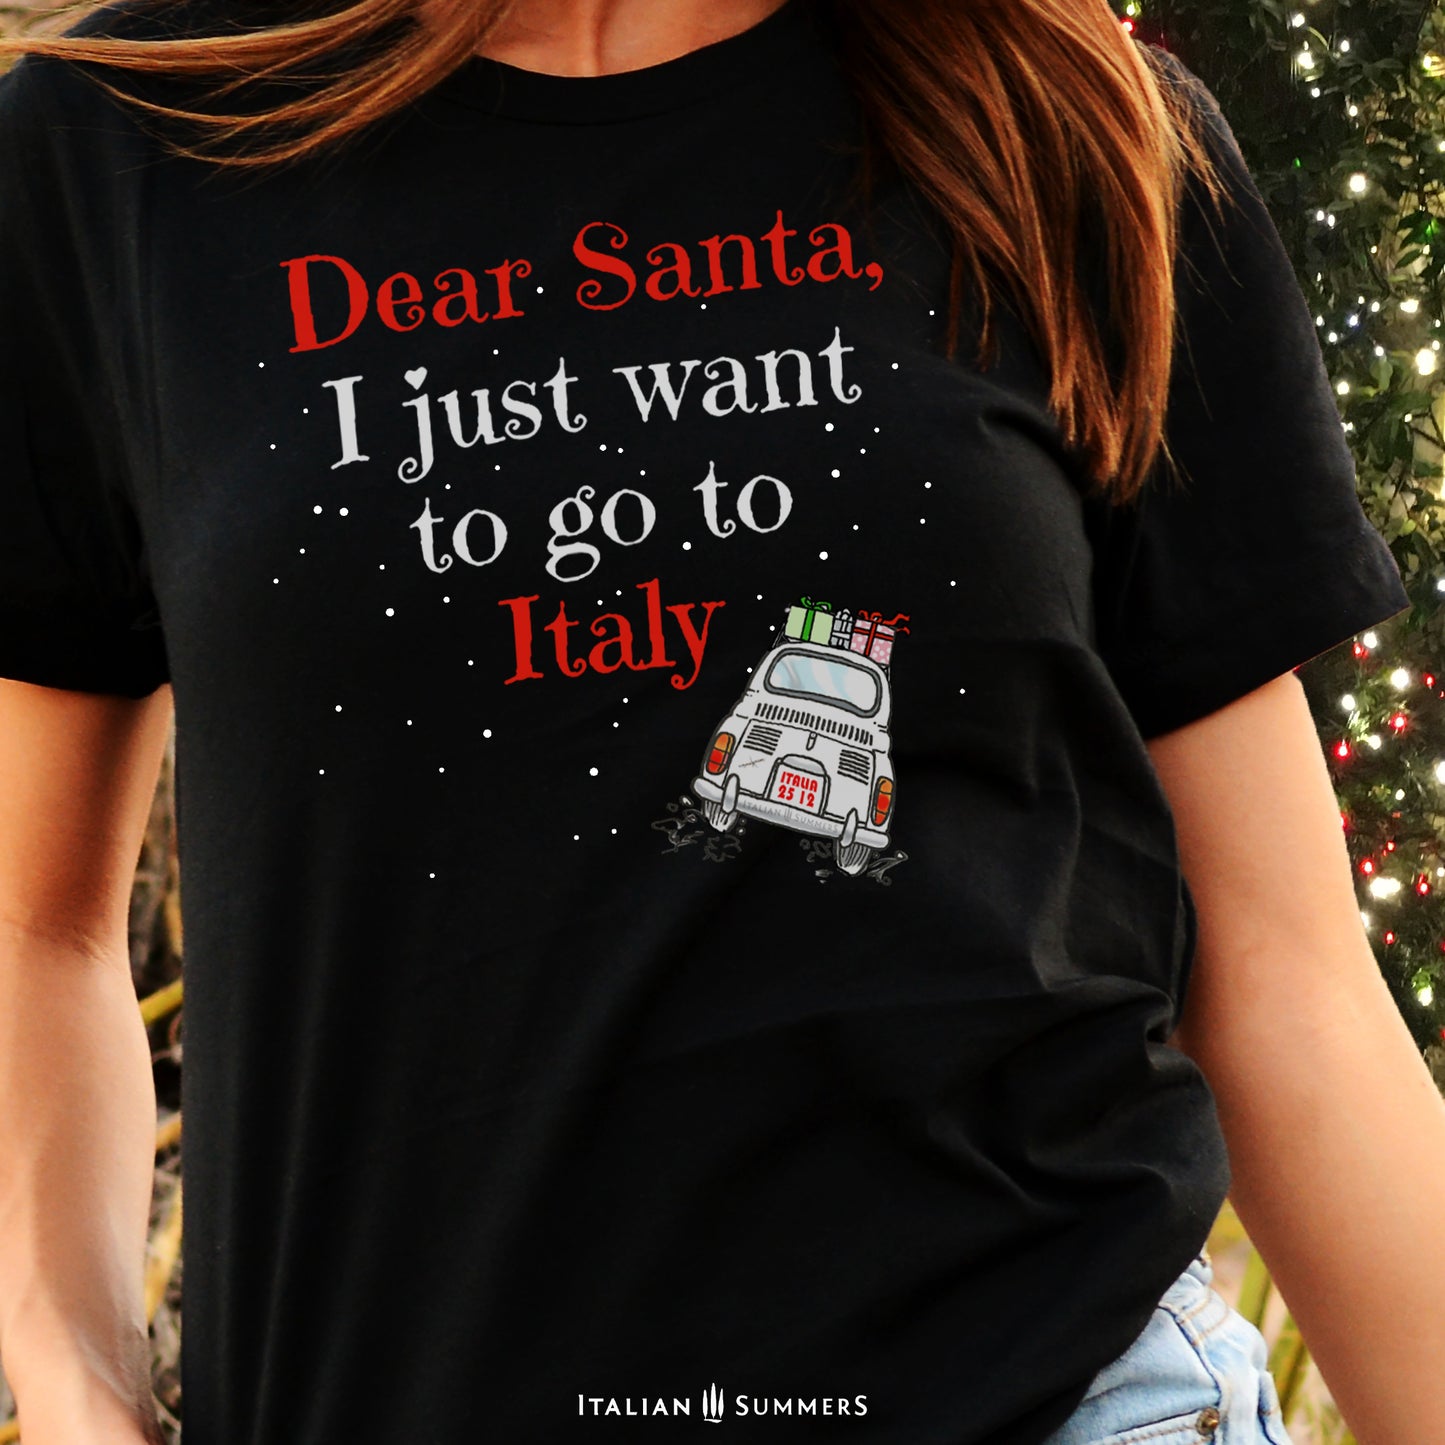 Christmas t-shirt Dear Santa  I just want to go to Italy by Italian Summers. Our bestseller Italy Chirstmas shirt with the quote and a sketch of a Fiat 500 with presents on the roof driving on its way to Italy while snow is falling!